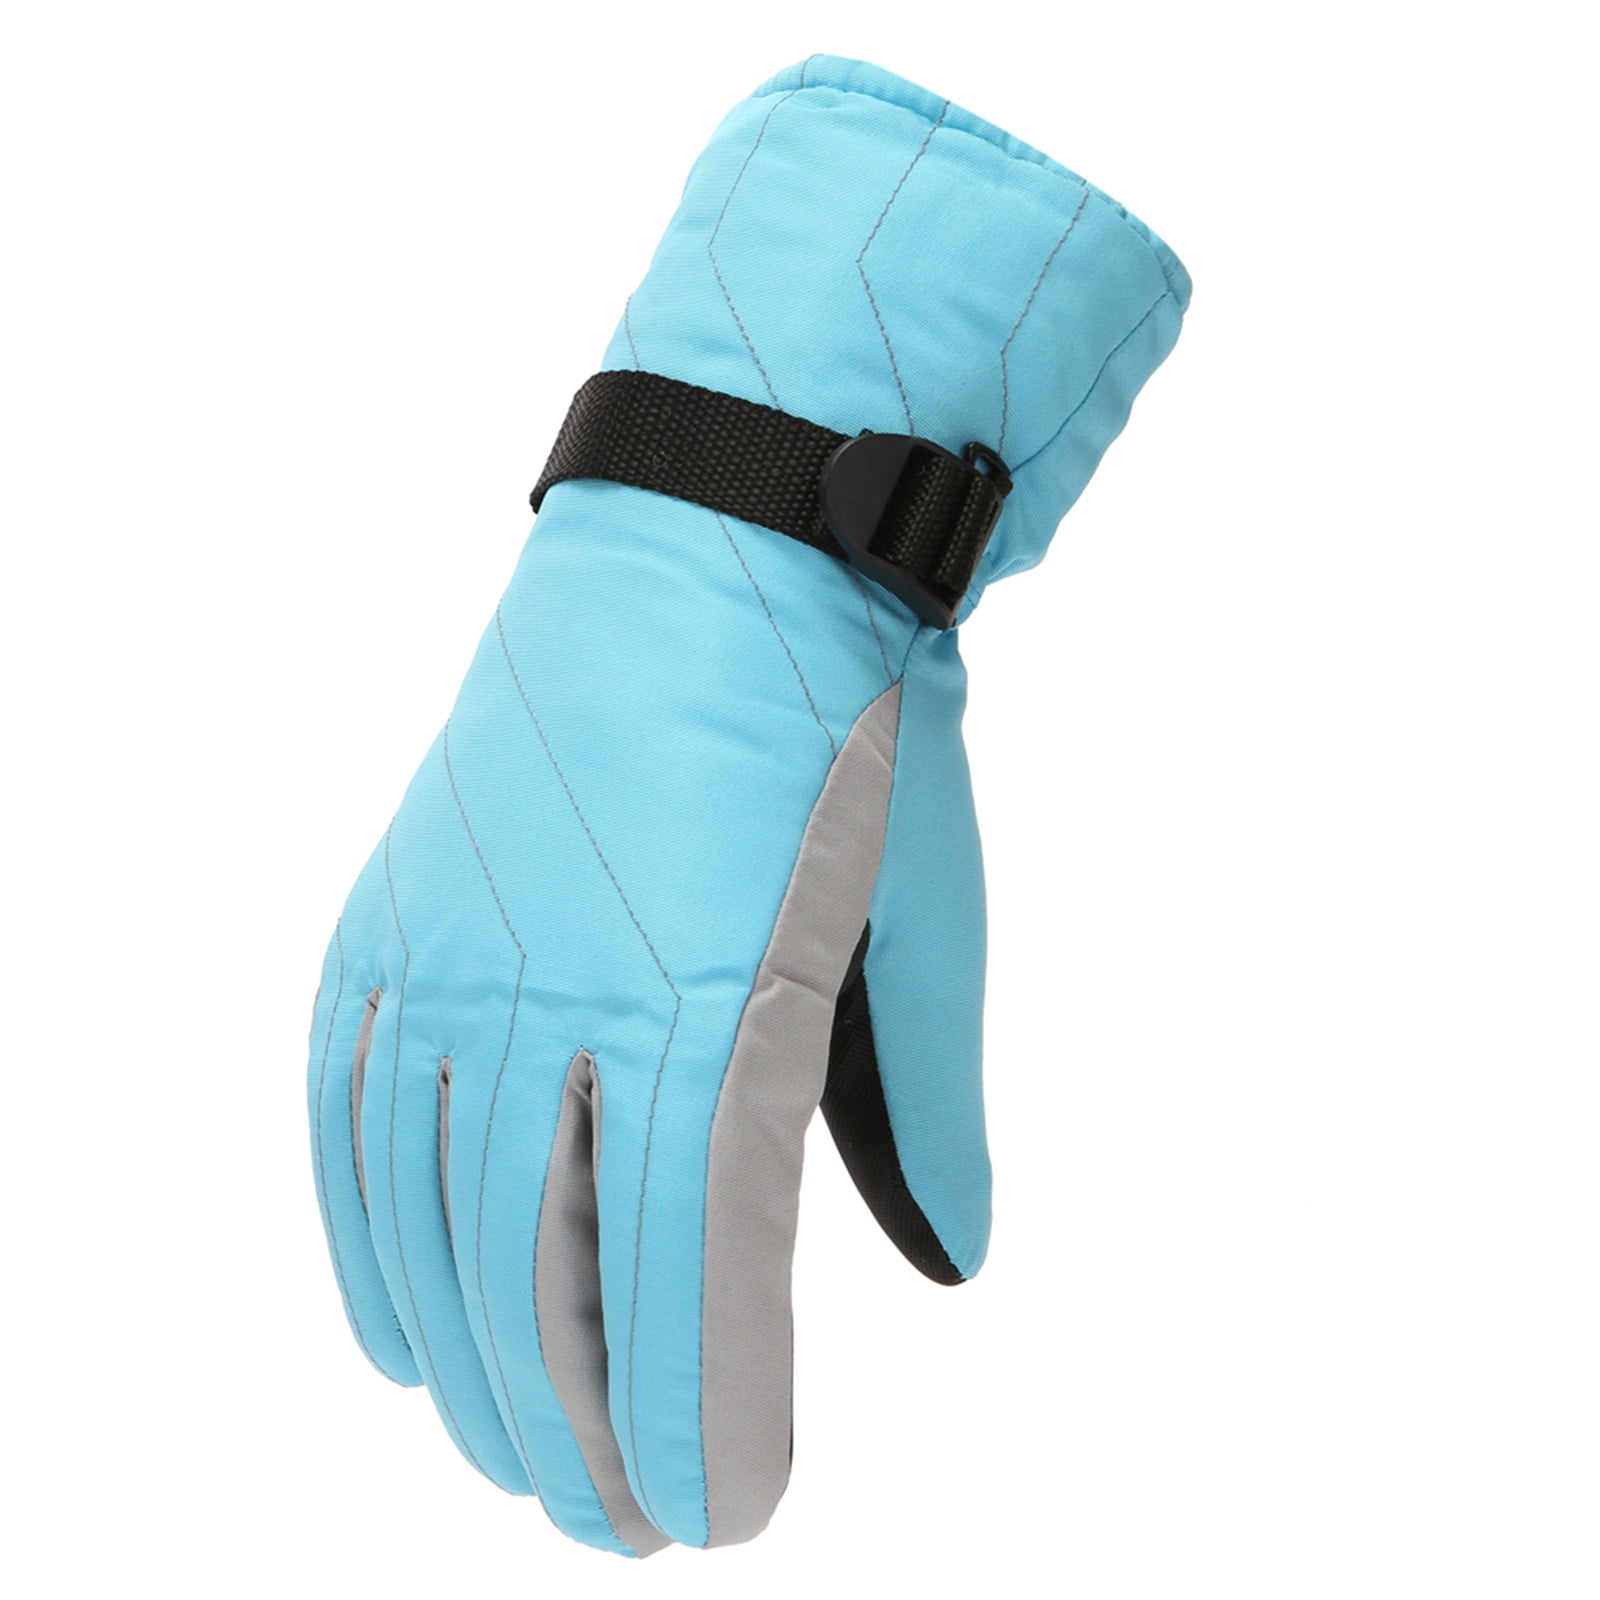 Yubnlvae Winter Windproof Gloves Sports Mittens Skiing Snow Outdoor Gloves  Light Blue